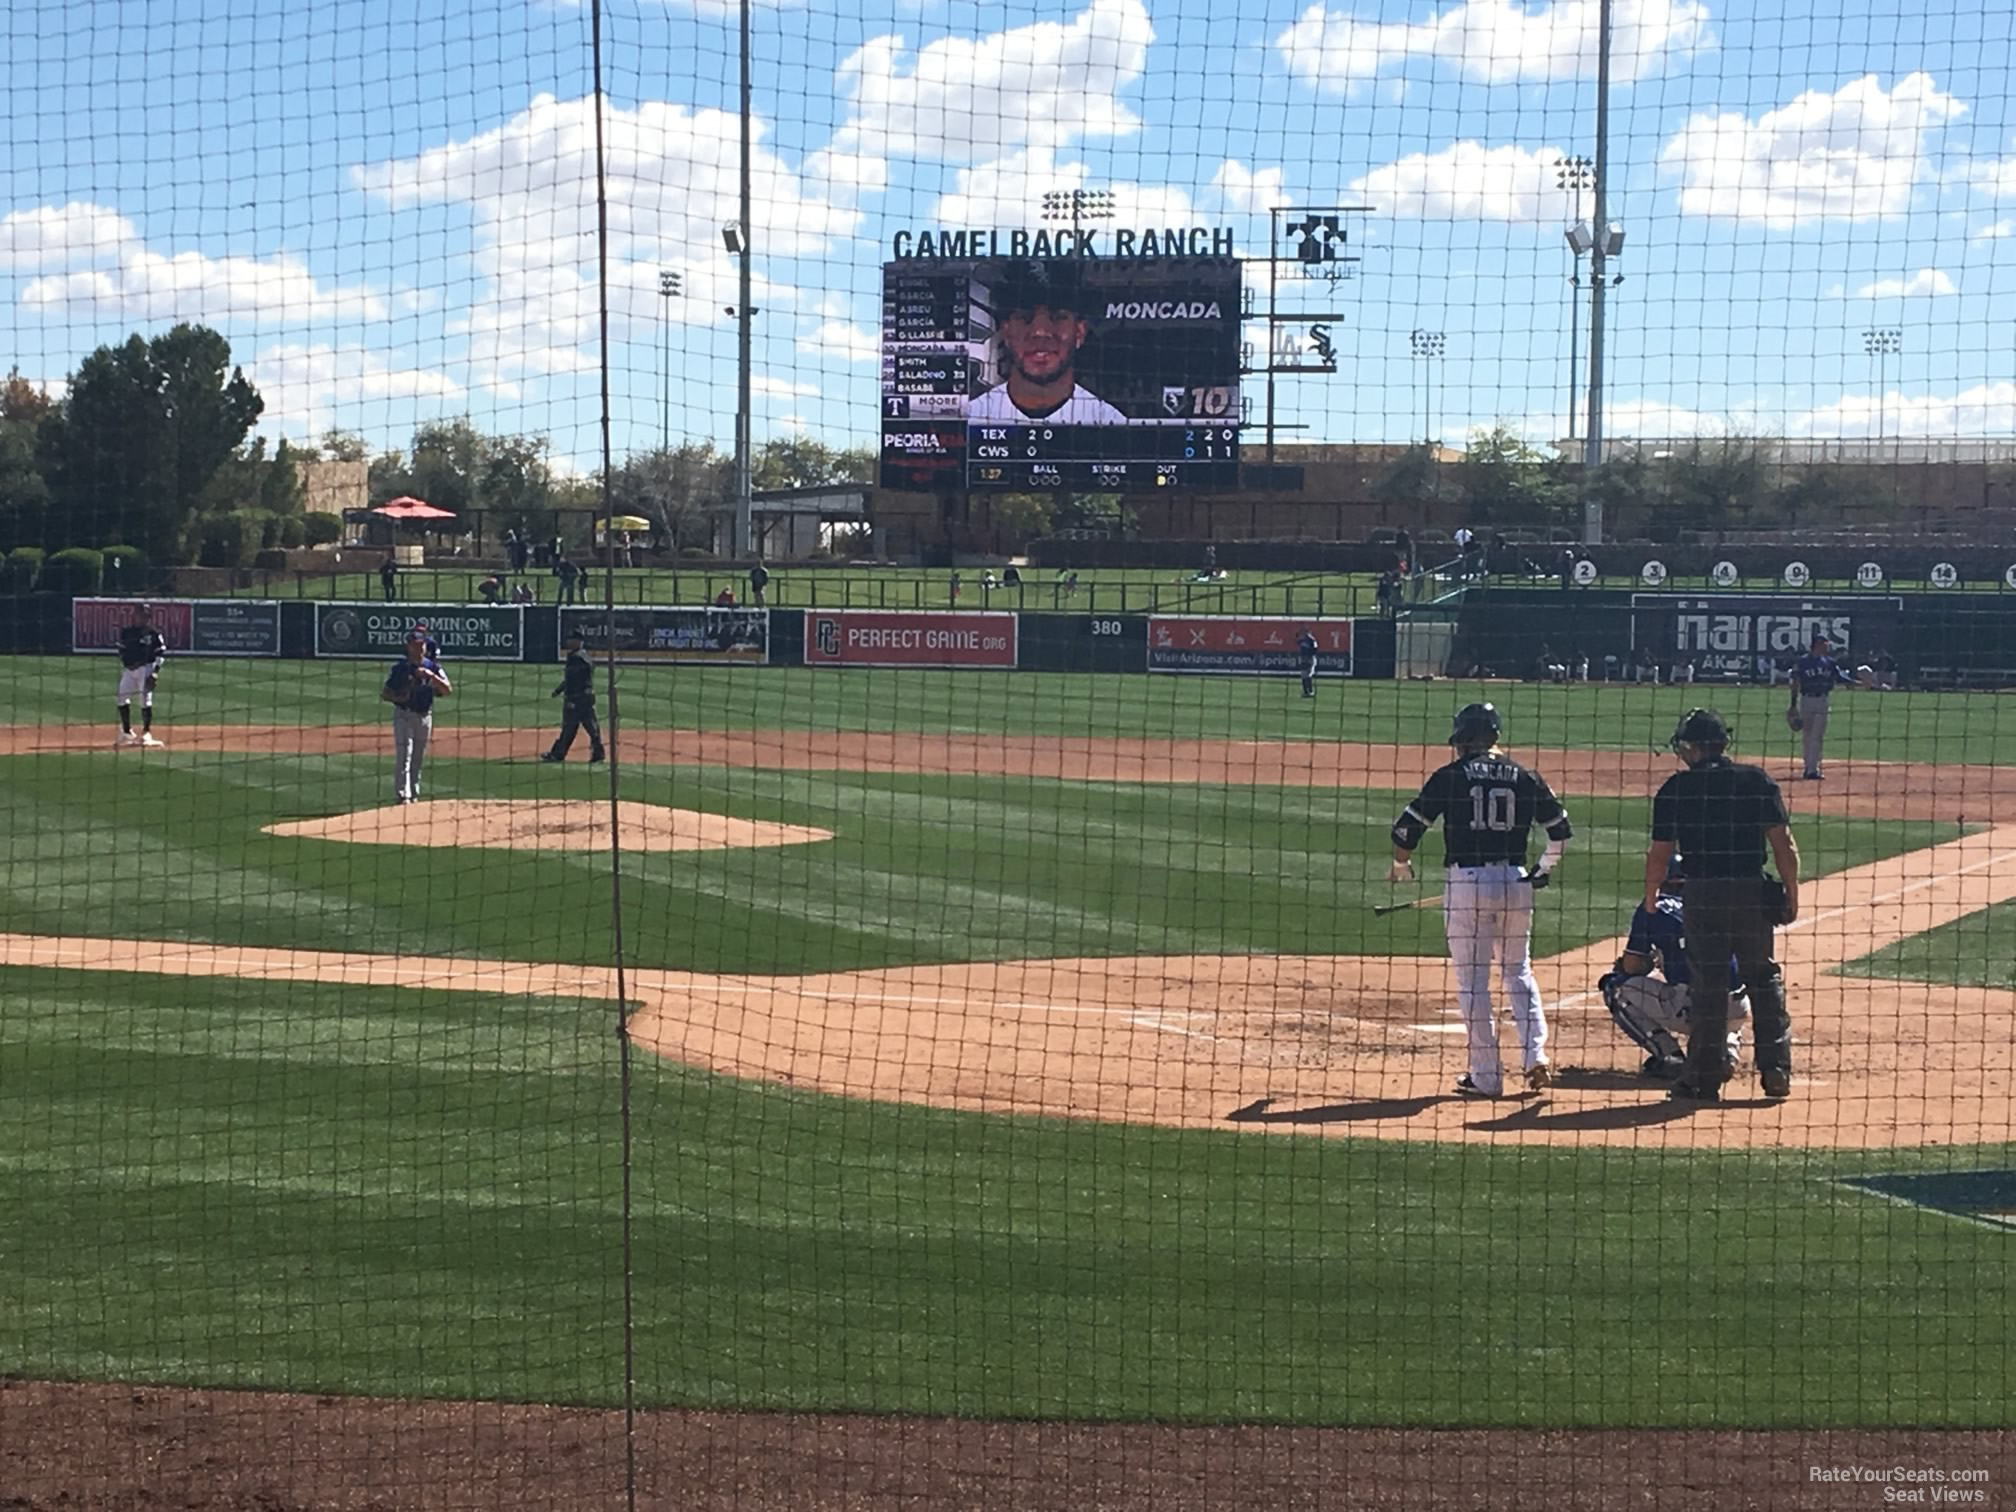 section 17, row 6 seat view  - camelback ranch